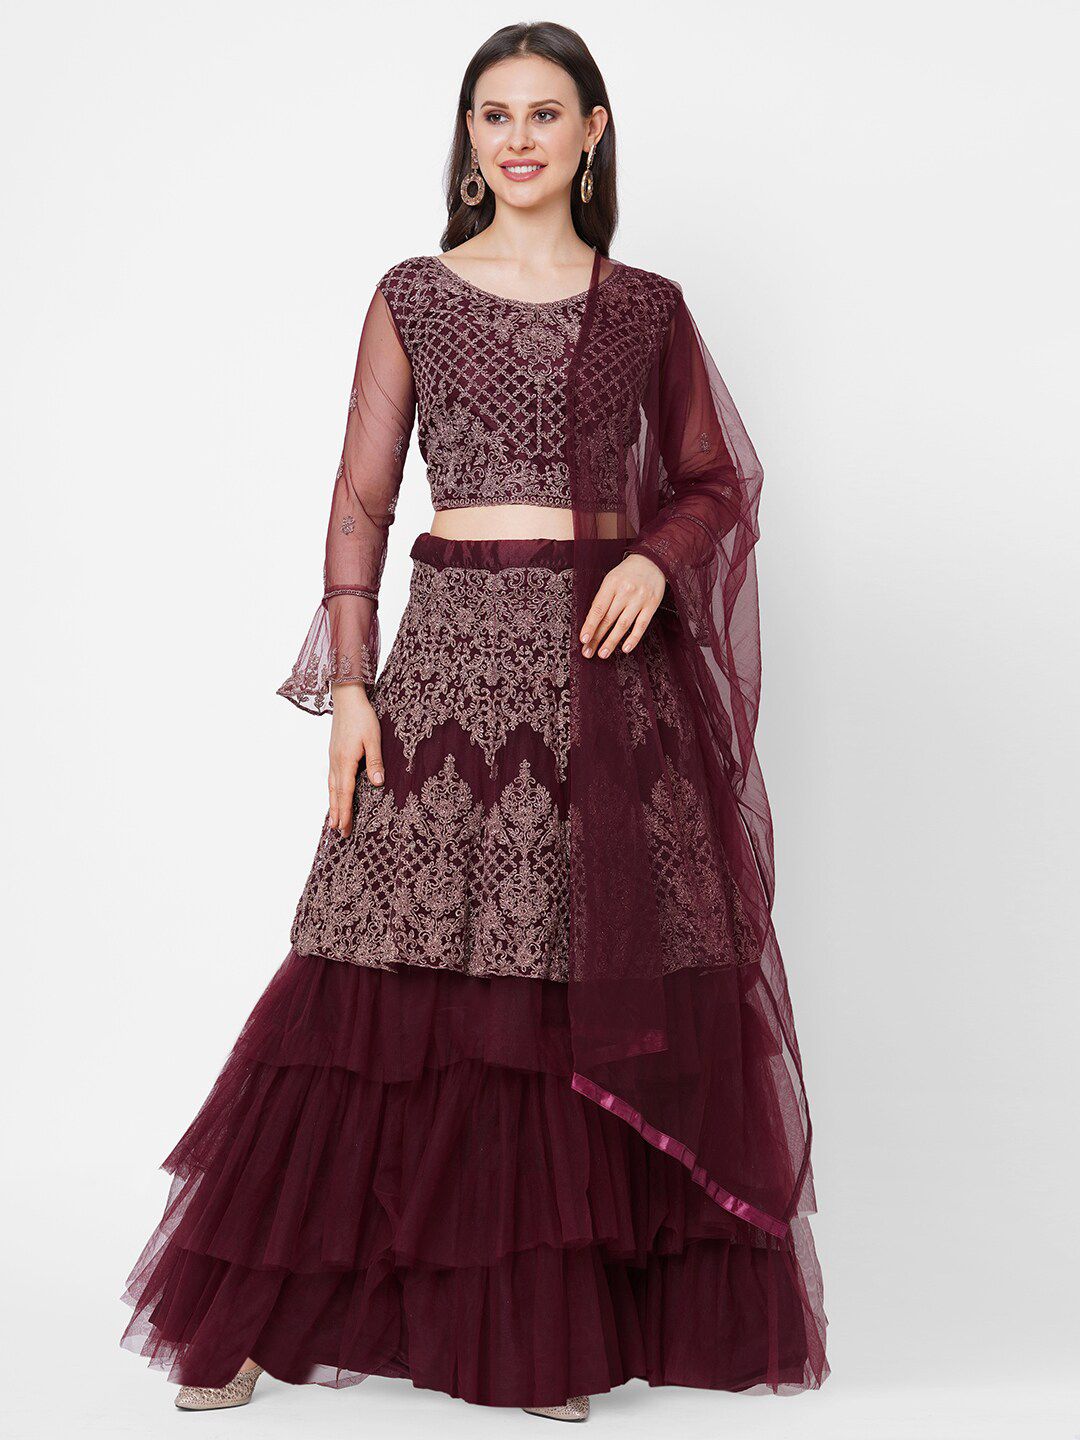 RedRound Maroon Embroidered Semi-Stitched Lehenga & Unstitched Blouse With Dupatta Price in India